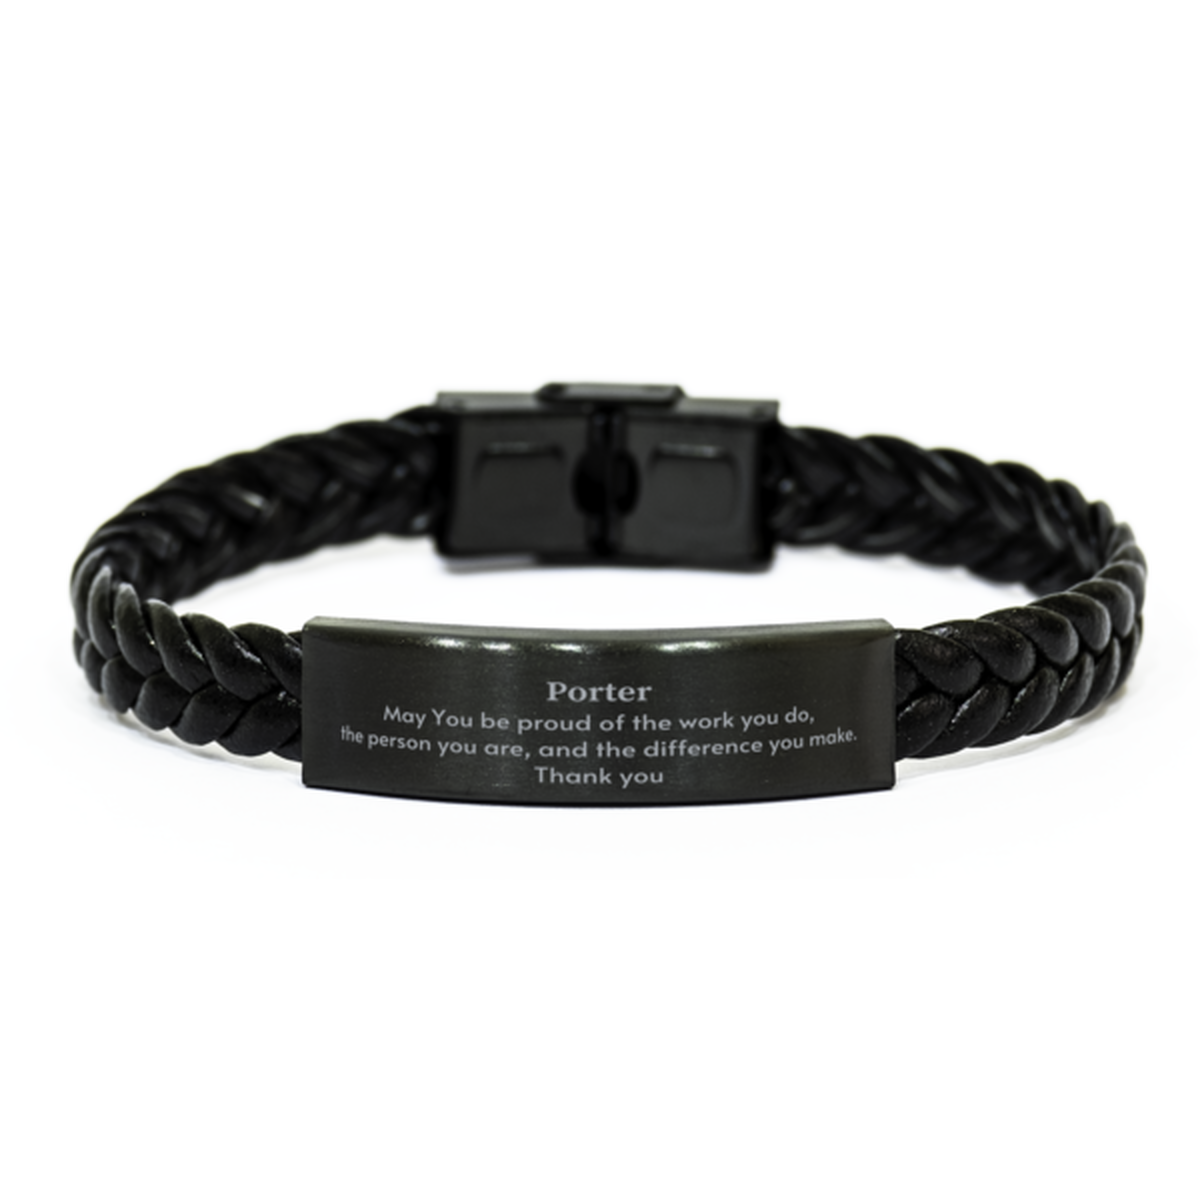 Heartwarming Braided Leather Bracelet Retirement Coworkers Gifts for Porter, Porter May You be proud of the work you do, the person you are Gifts for Boss Men Women Friends